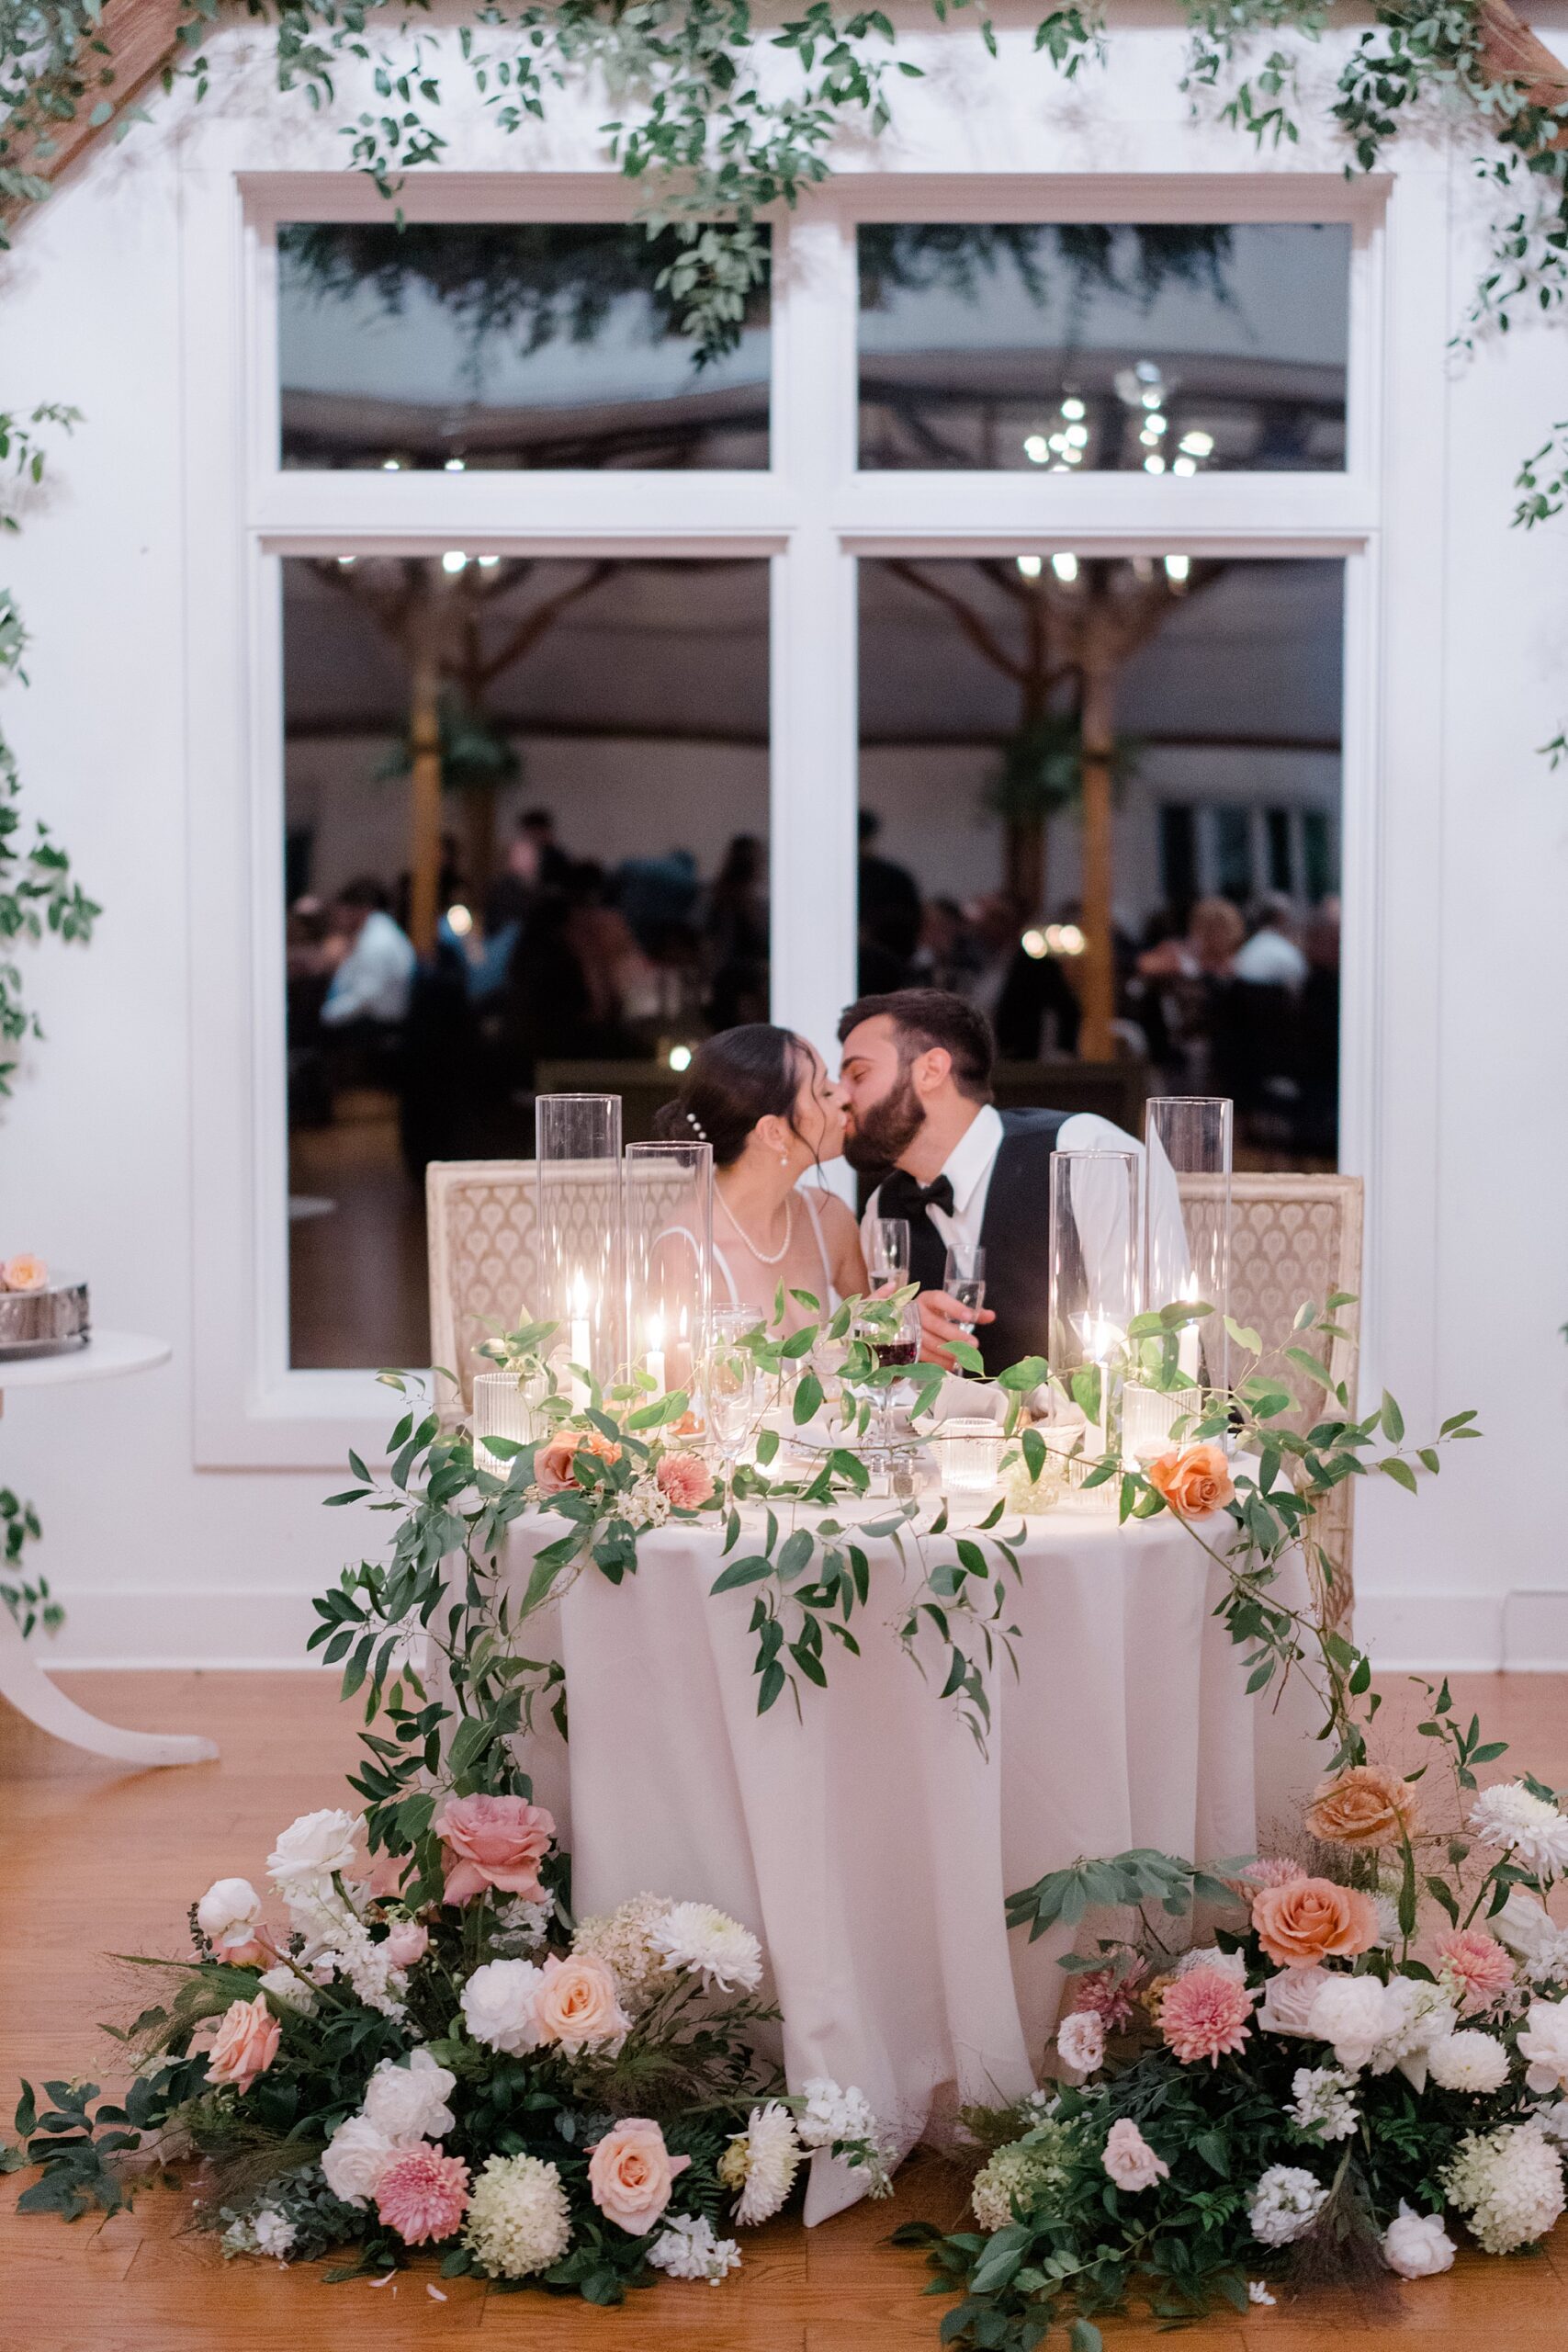 newlyweds kiss as they sit together at Romantic Floral-Centered Wedding reception